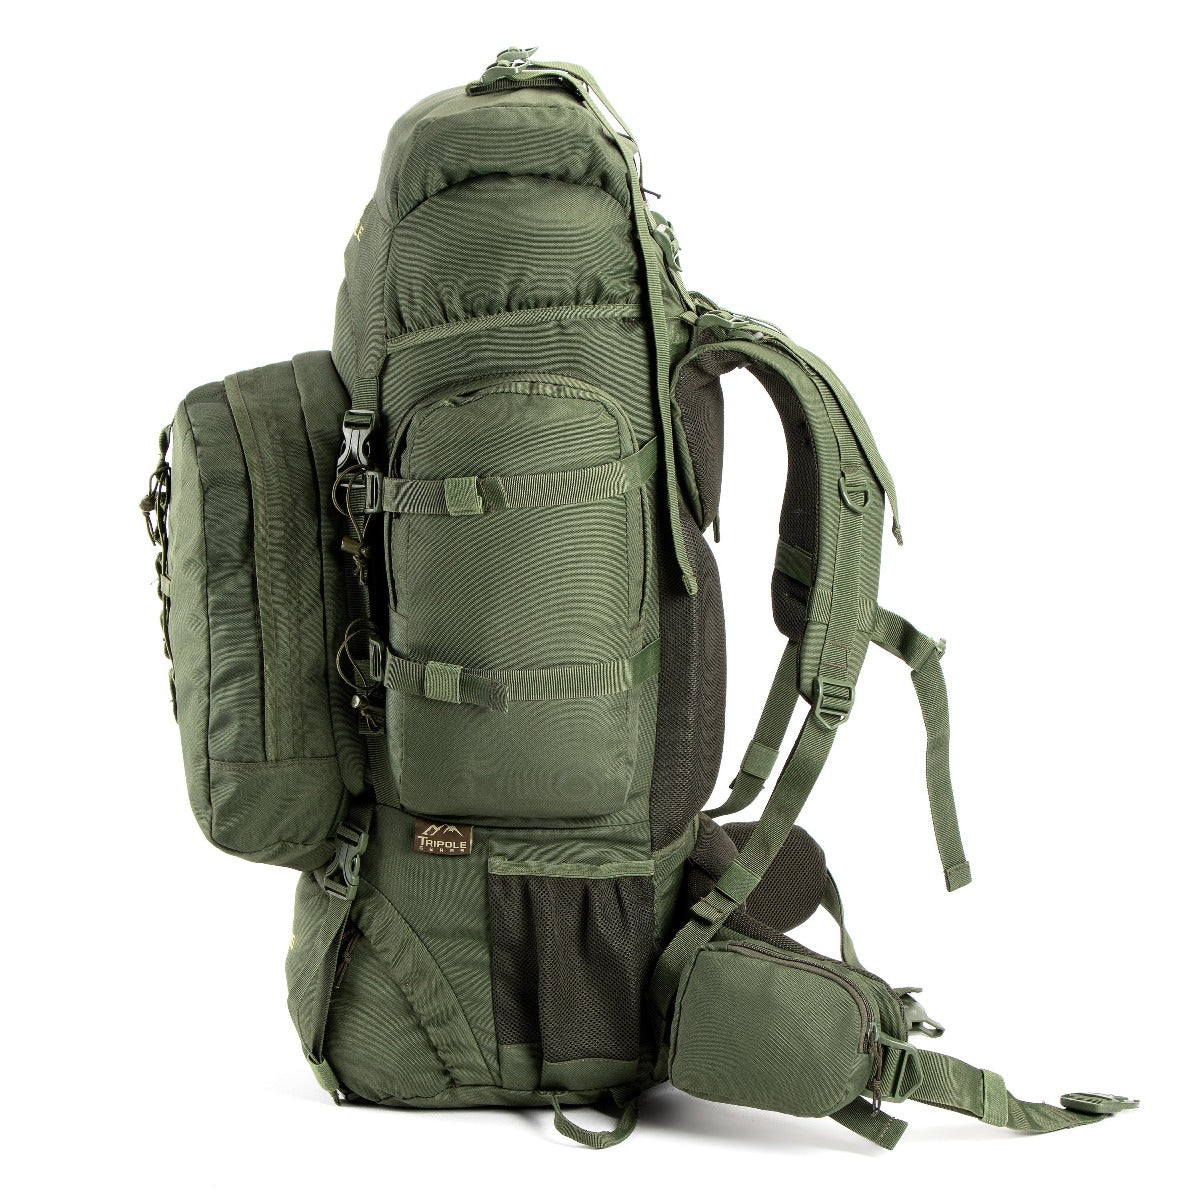 Colonel Series Rucksack + Detachable Day Pack & Rain Cover - 80 Litres- Army Green 3